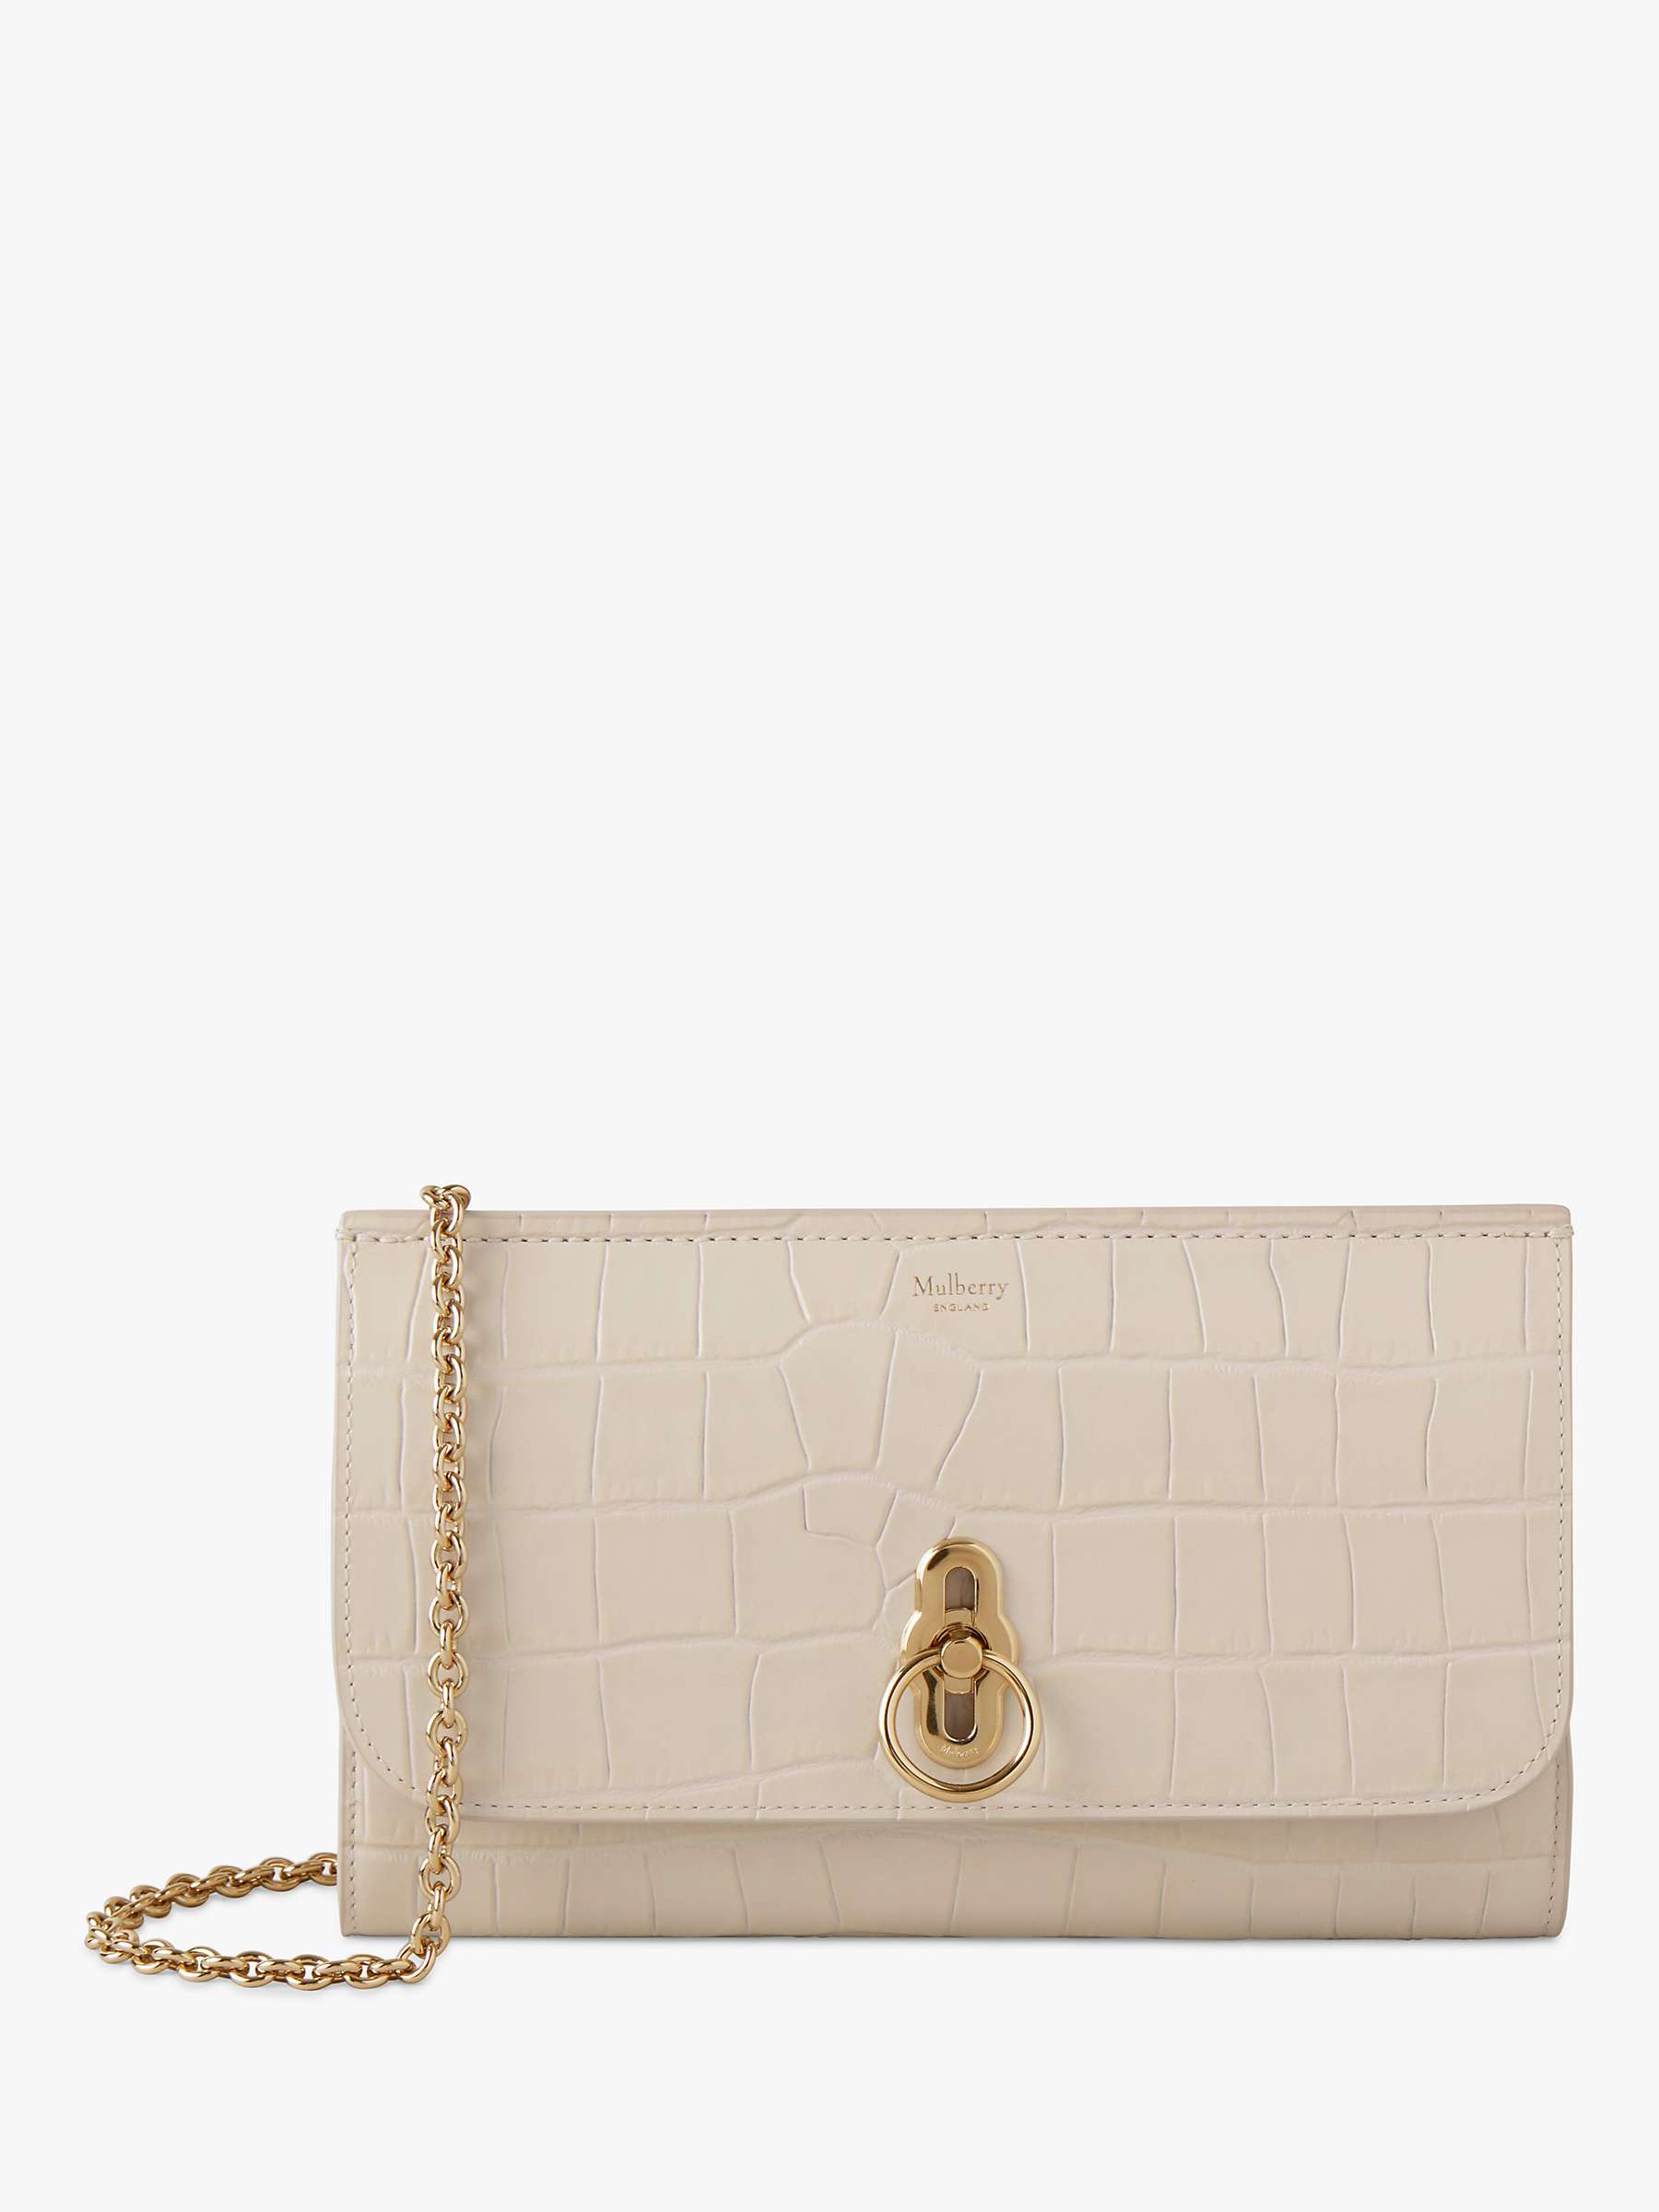 Buy Mulberry Amberley Shiny Croc Effect Leather Clutch Bag, Eggshell Online at johnlewis.com